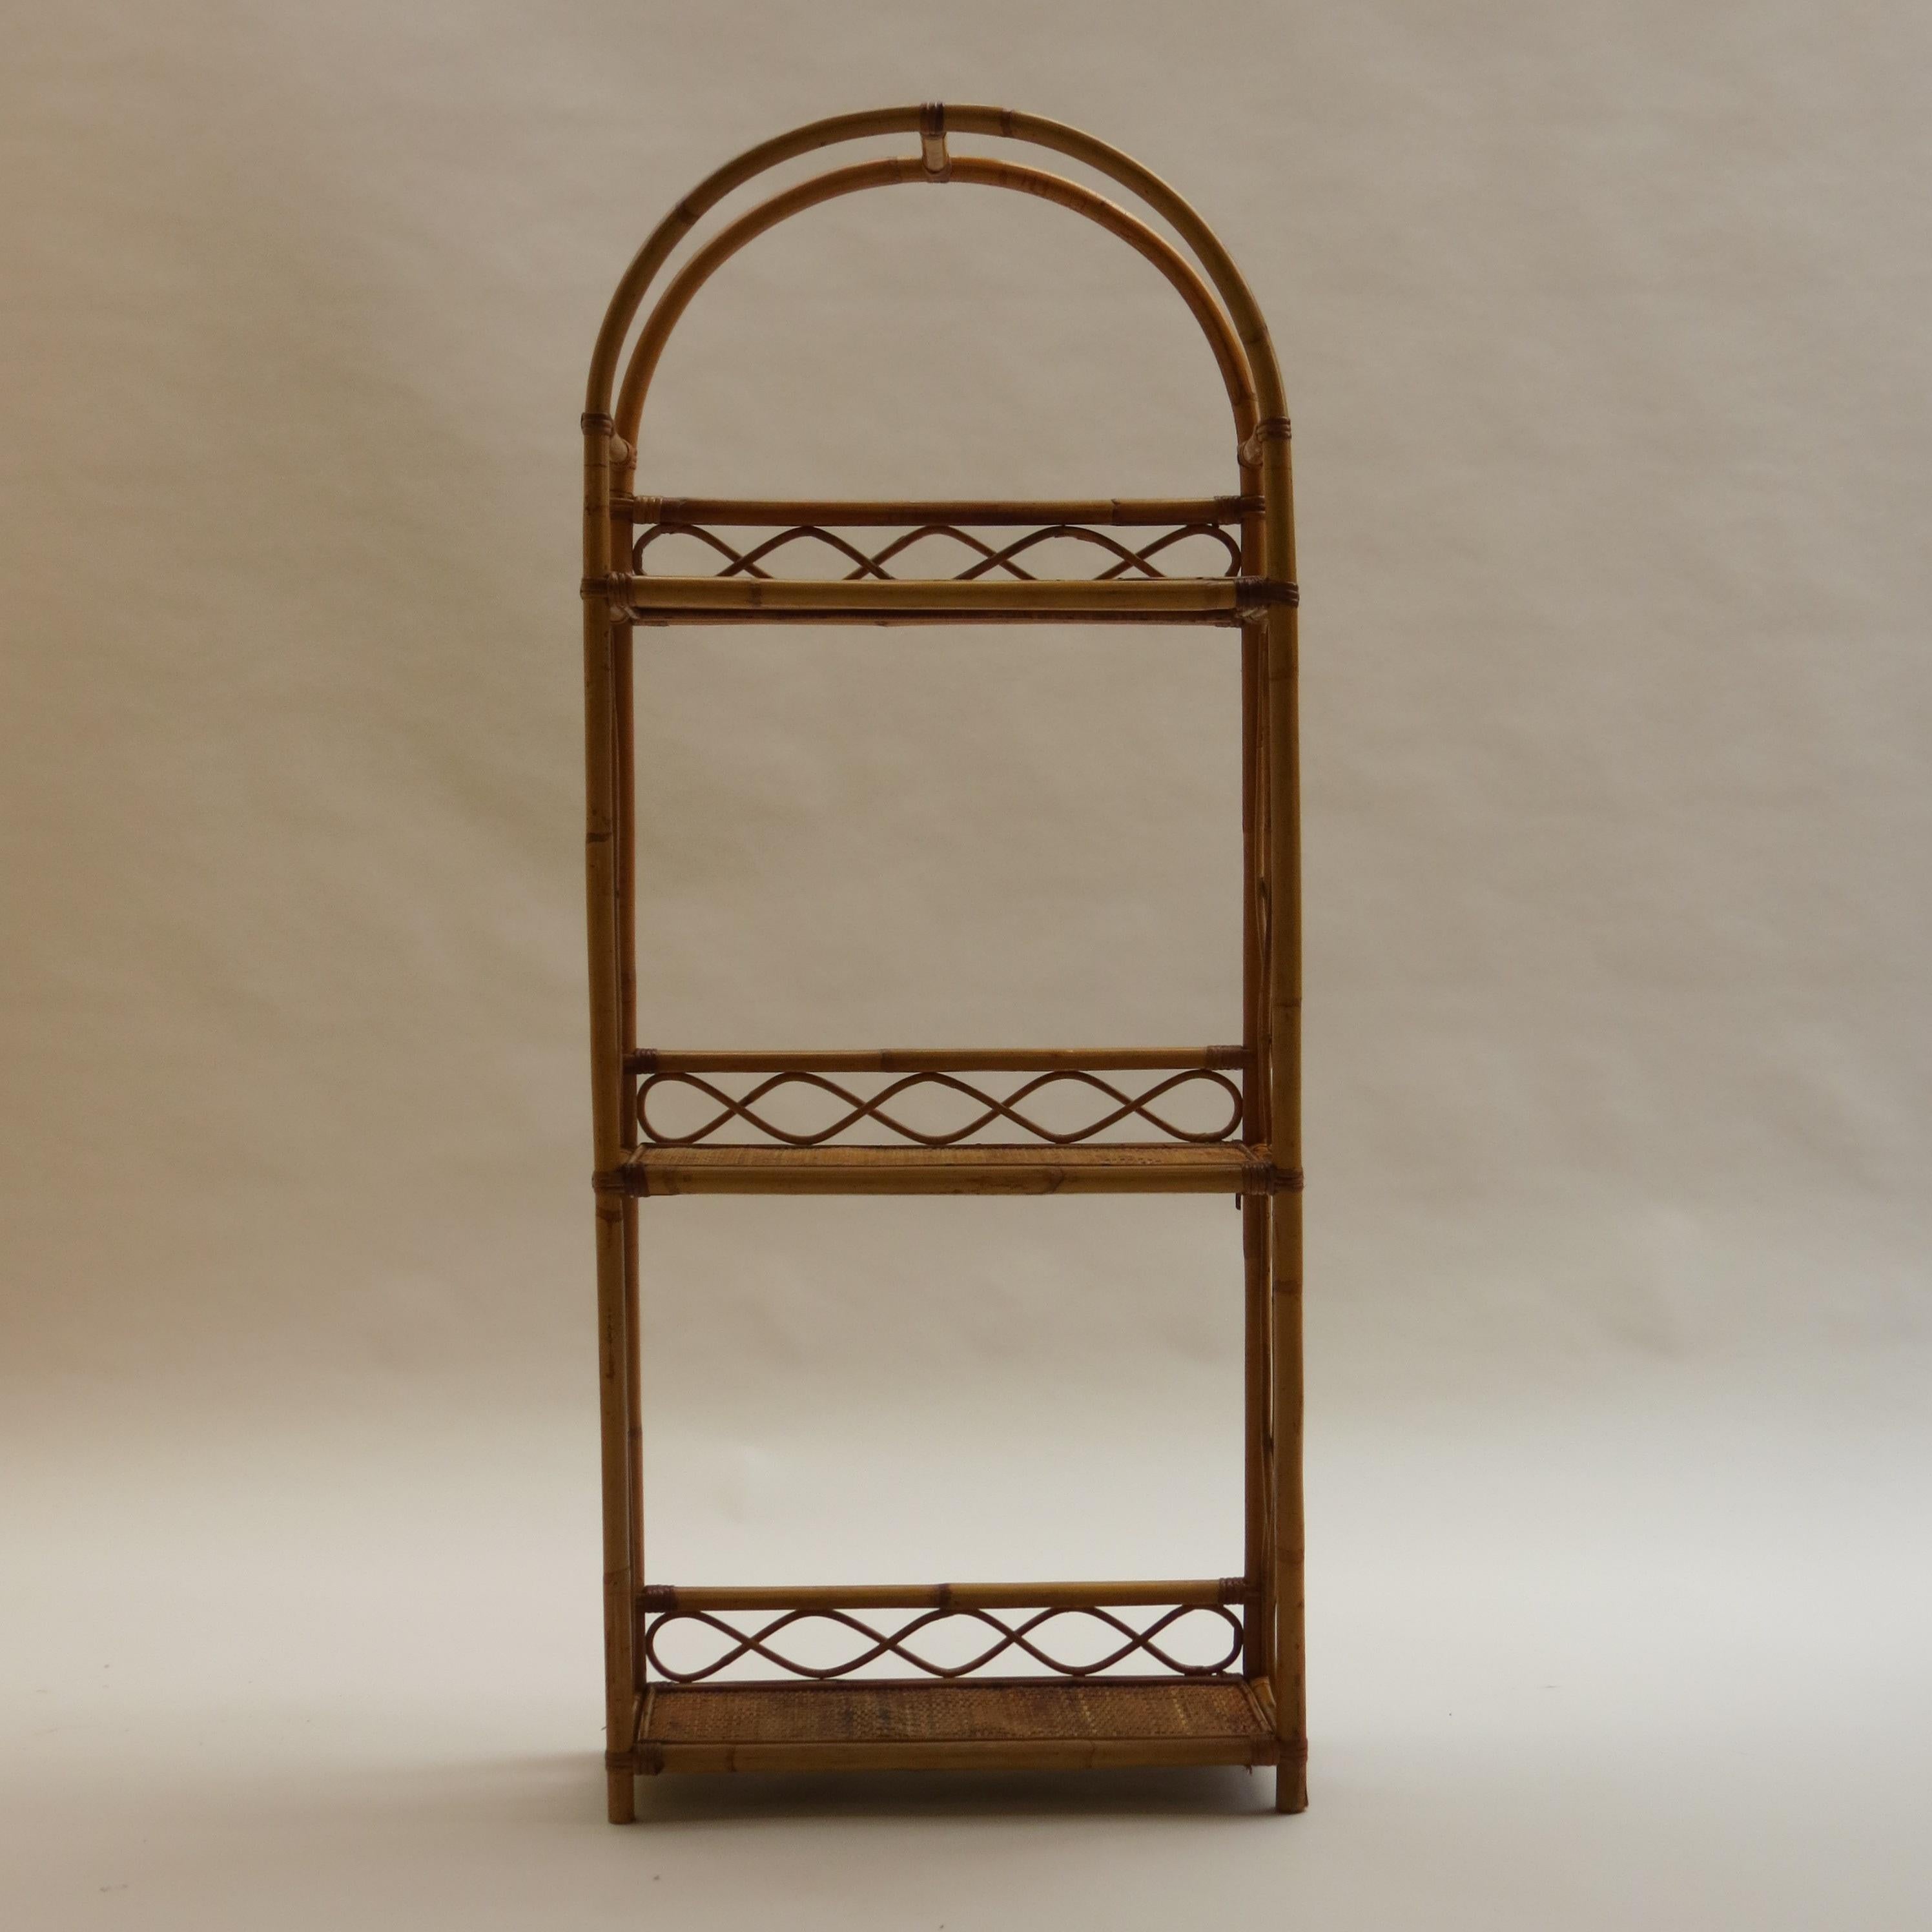 A 1970s cane and bamboo bookcase shelving unit with good decorative cane work. A good storage shelving unit, wonderful warm color and nicely patinated. 

ST1227.

 